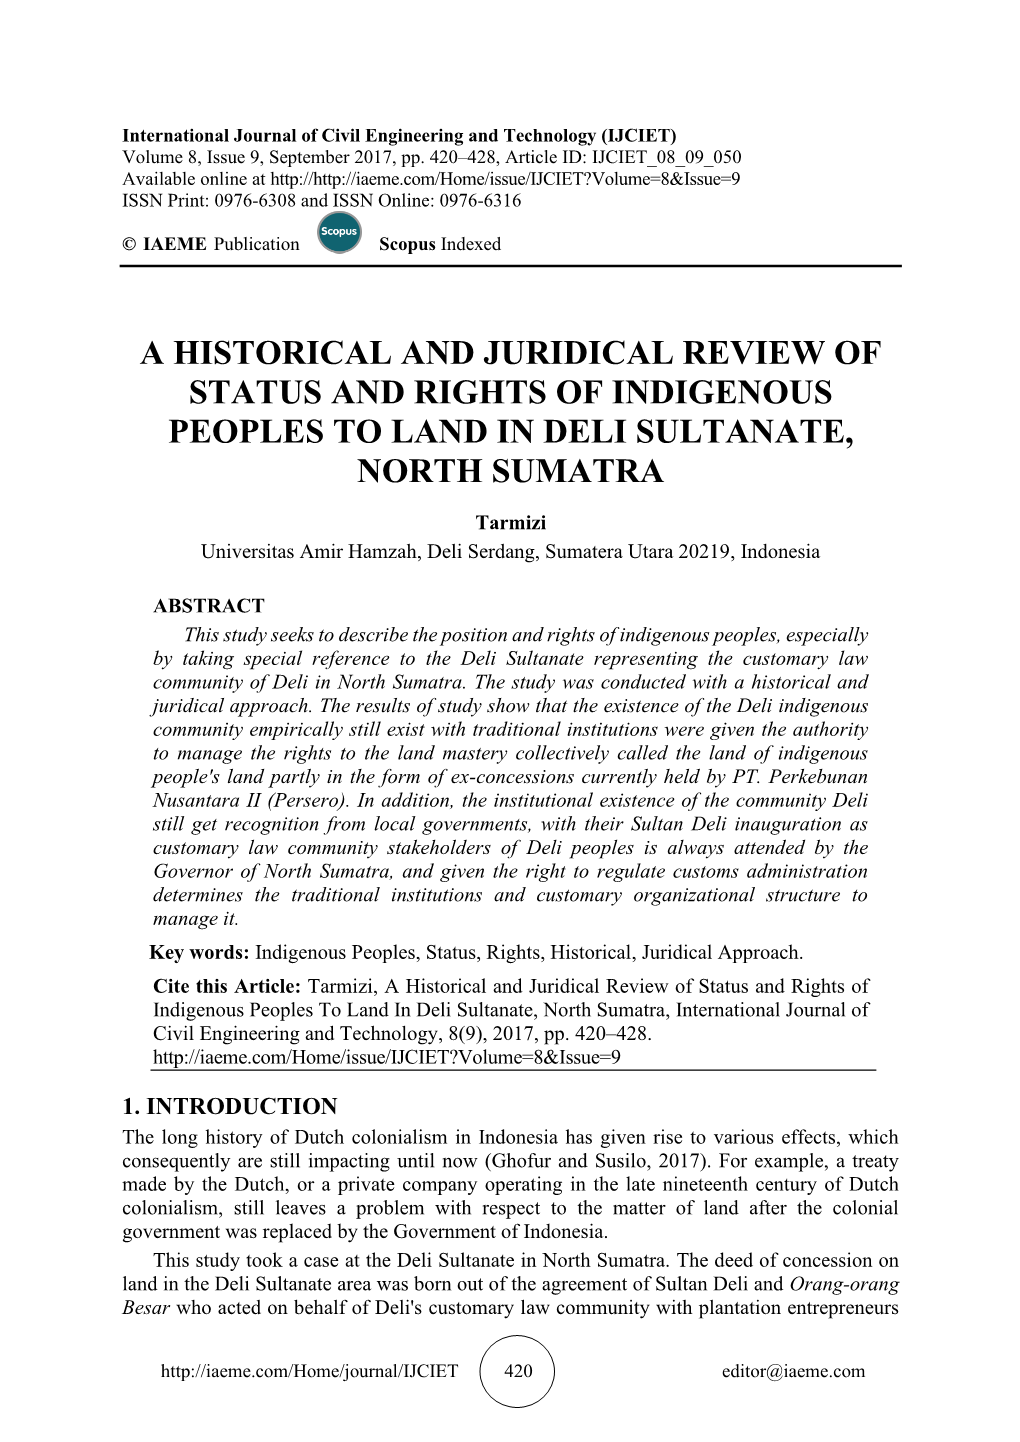 A Historical and Juridical Review of Status and Rights of Indigenous Peoples to Land in Deli Sultanate, North Sumatra